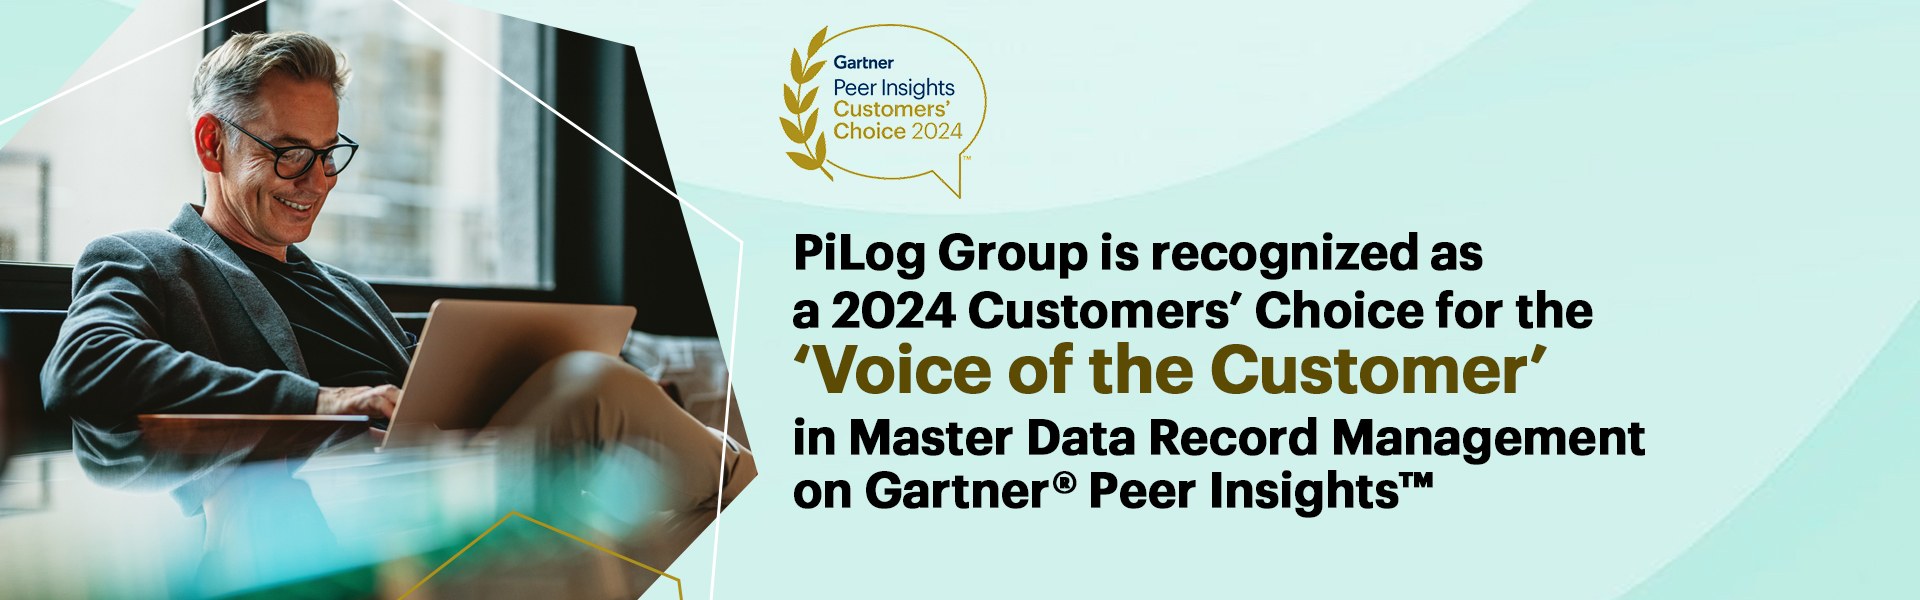 2024 choice for the voice of the customer in master data record management